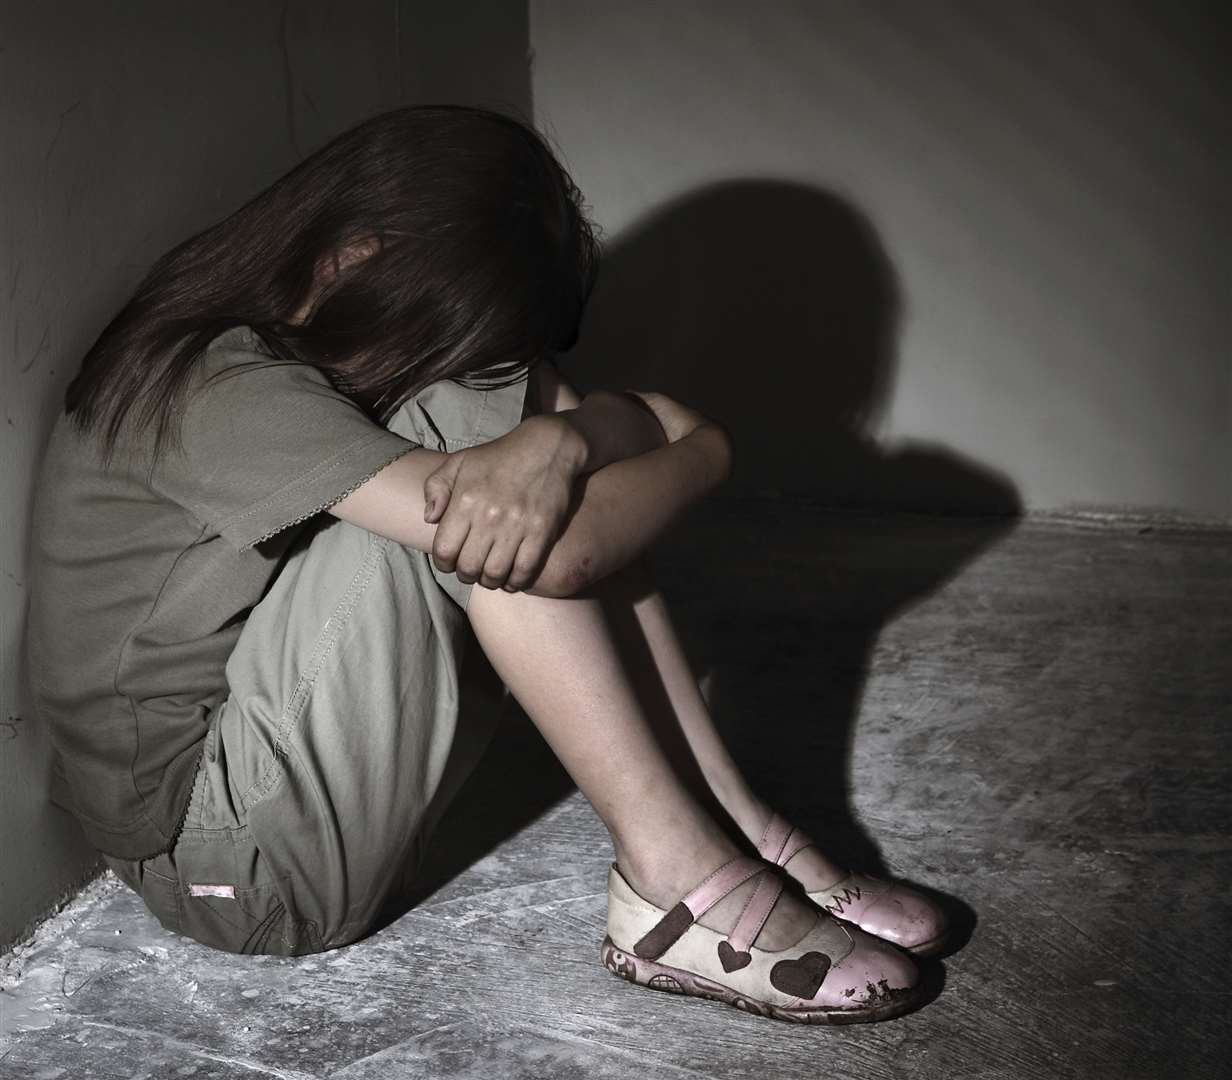 Rayner subjected his victim to years of abuse. Stock image: Thinkstock Image Library